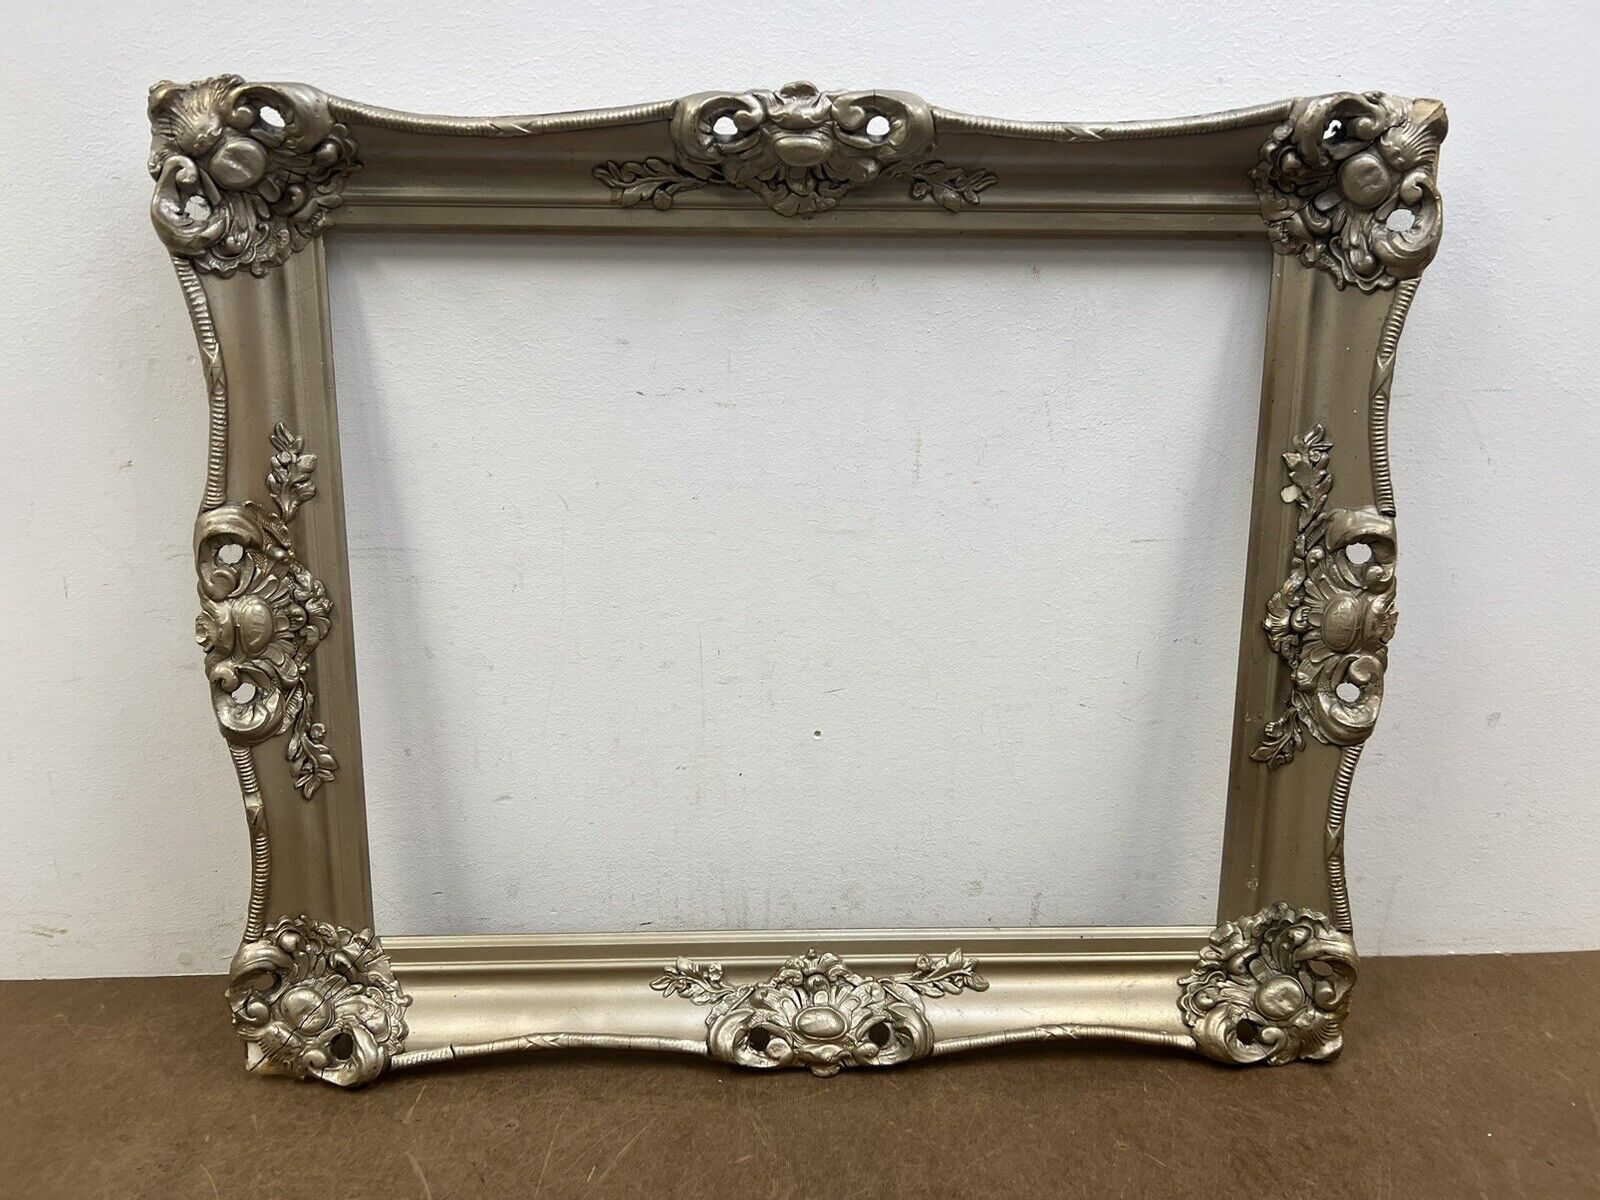 Antique Picture Frame silver wood vintage ornate gesso wall art FITS 16 x 20